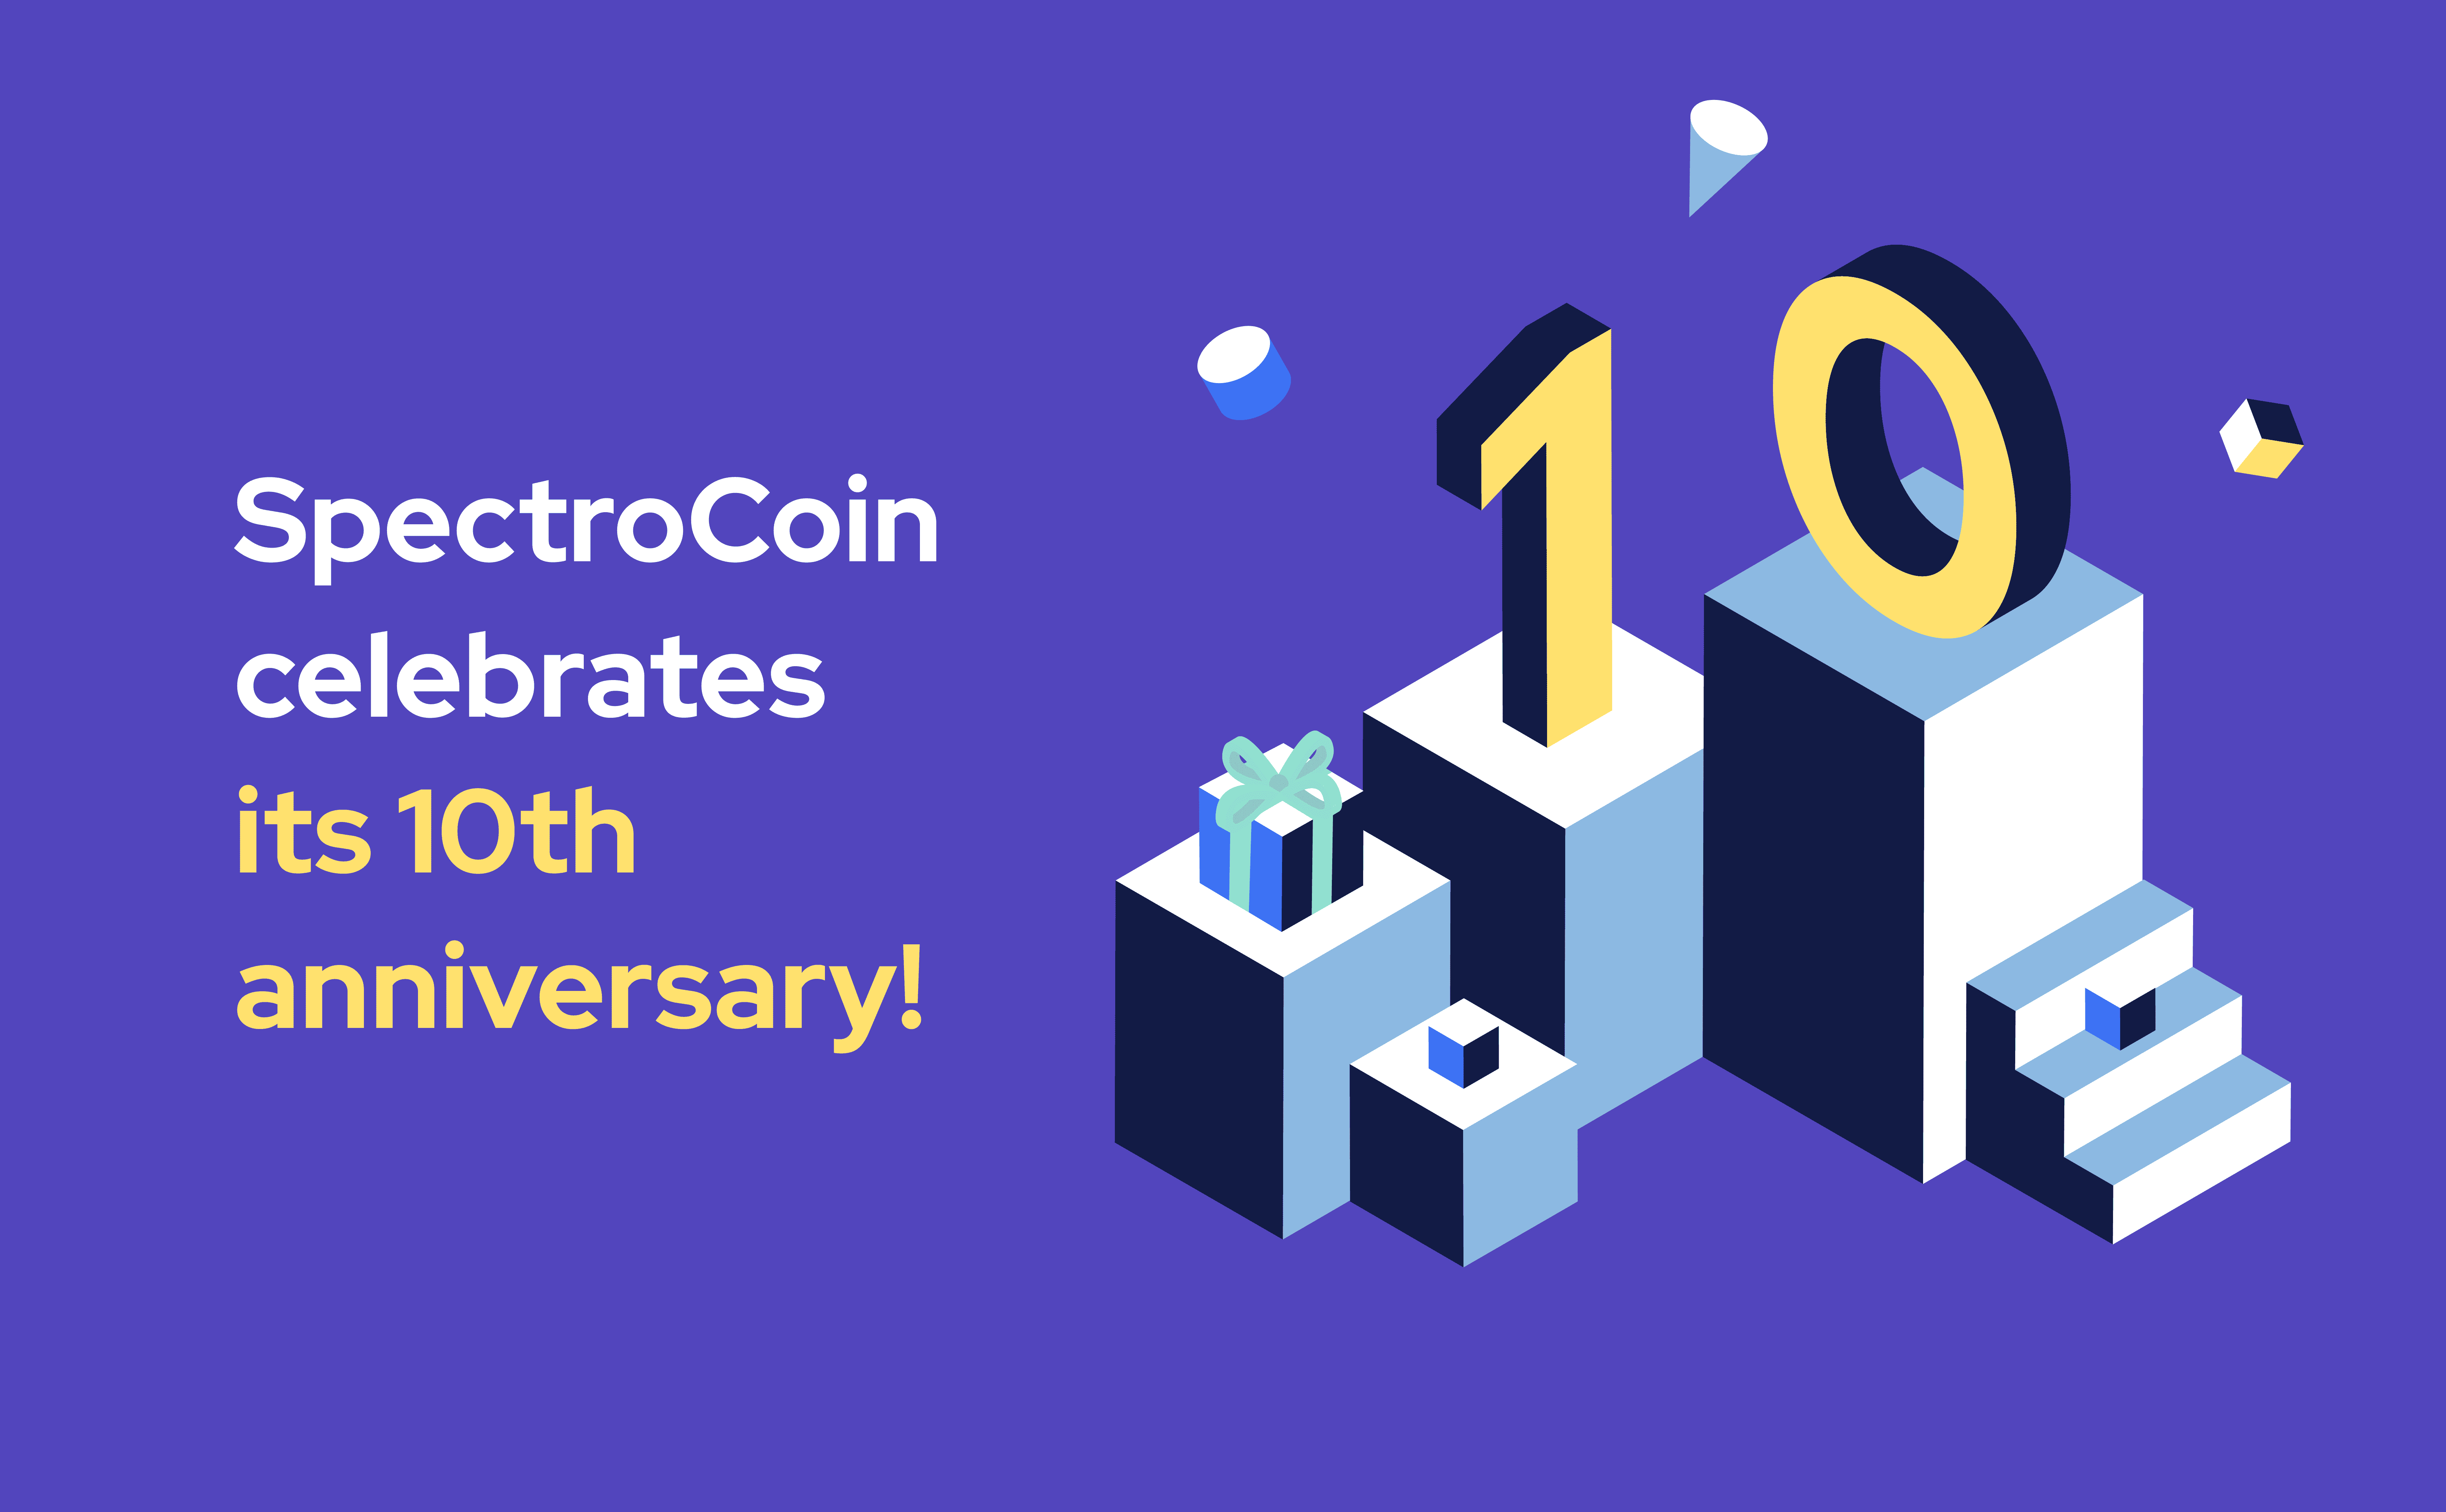 SpectroCoin, a crypto wallet and app, is 10 years